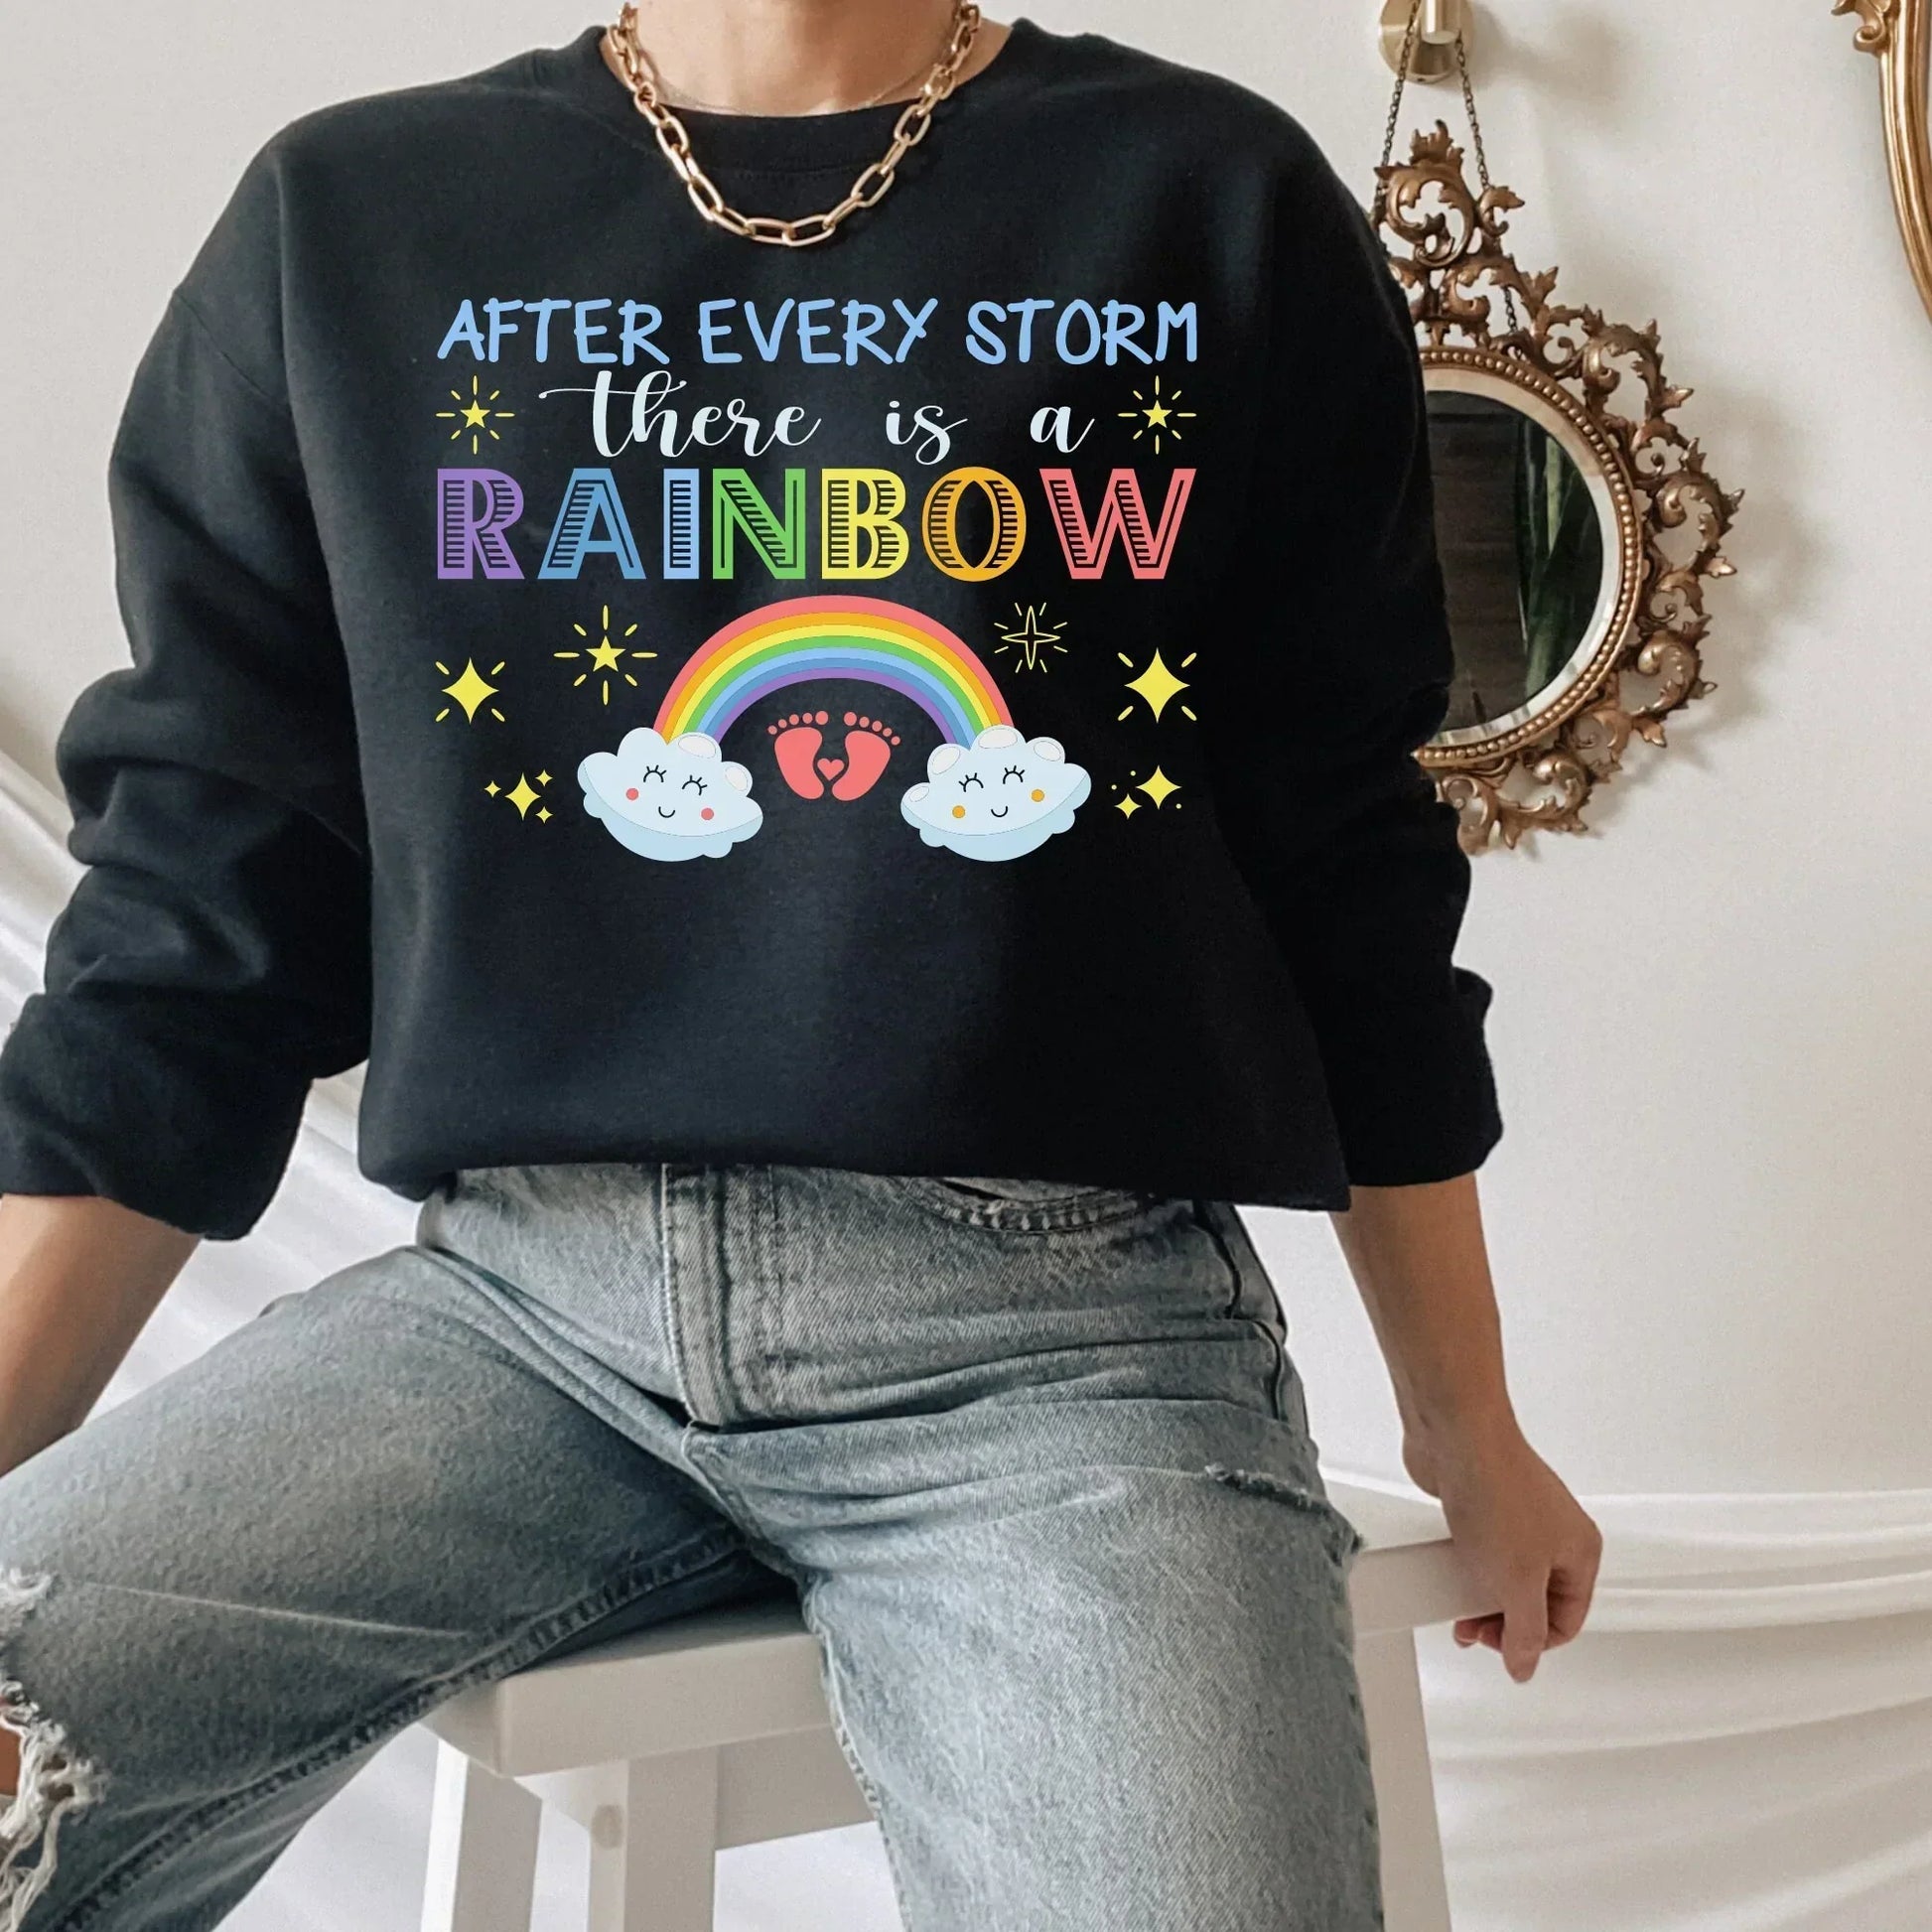 Pregnancy sweatshirt, Maternity shirt, Rainbow Pregnancy Reveal to Husband, Soon to Be Mom, Expecting Mother Hoodie, New Baby Coming Soon